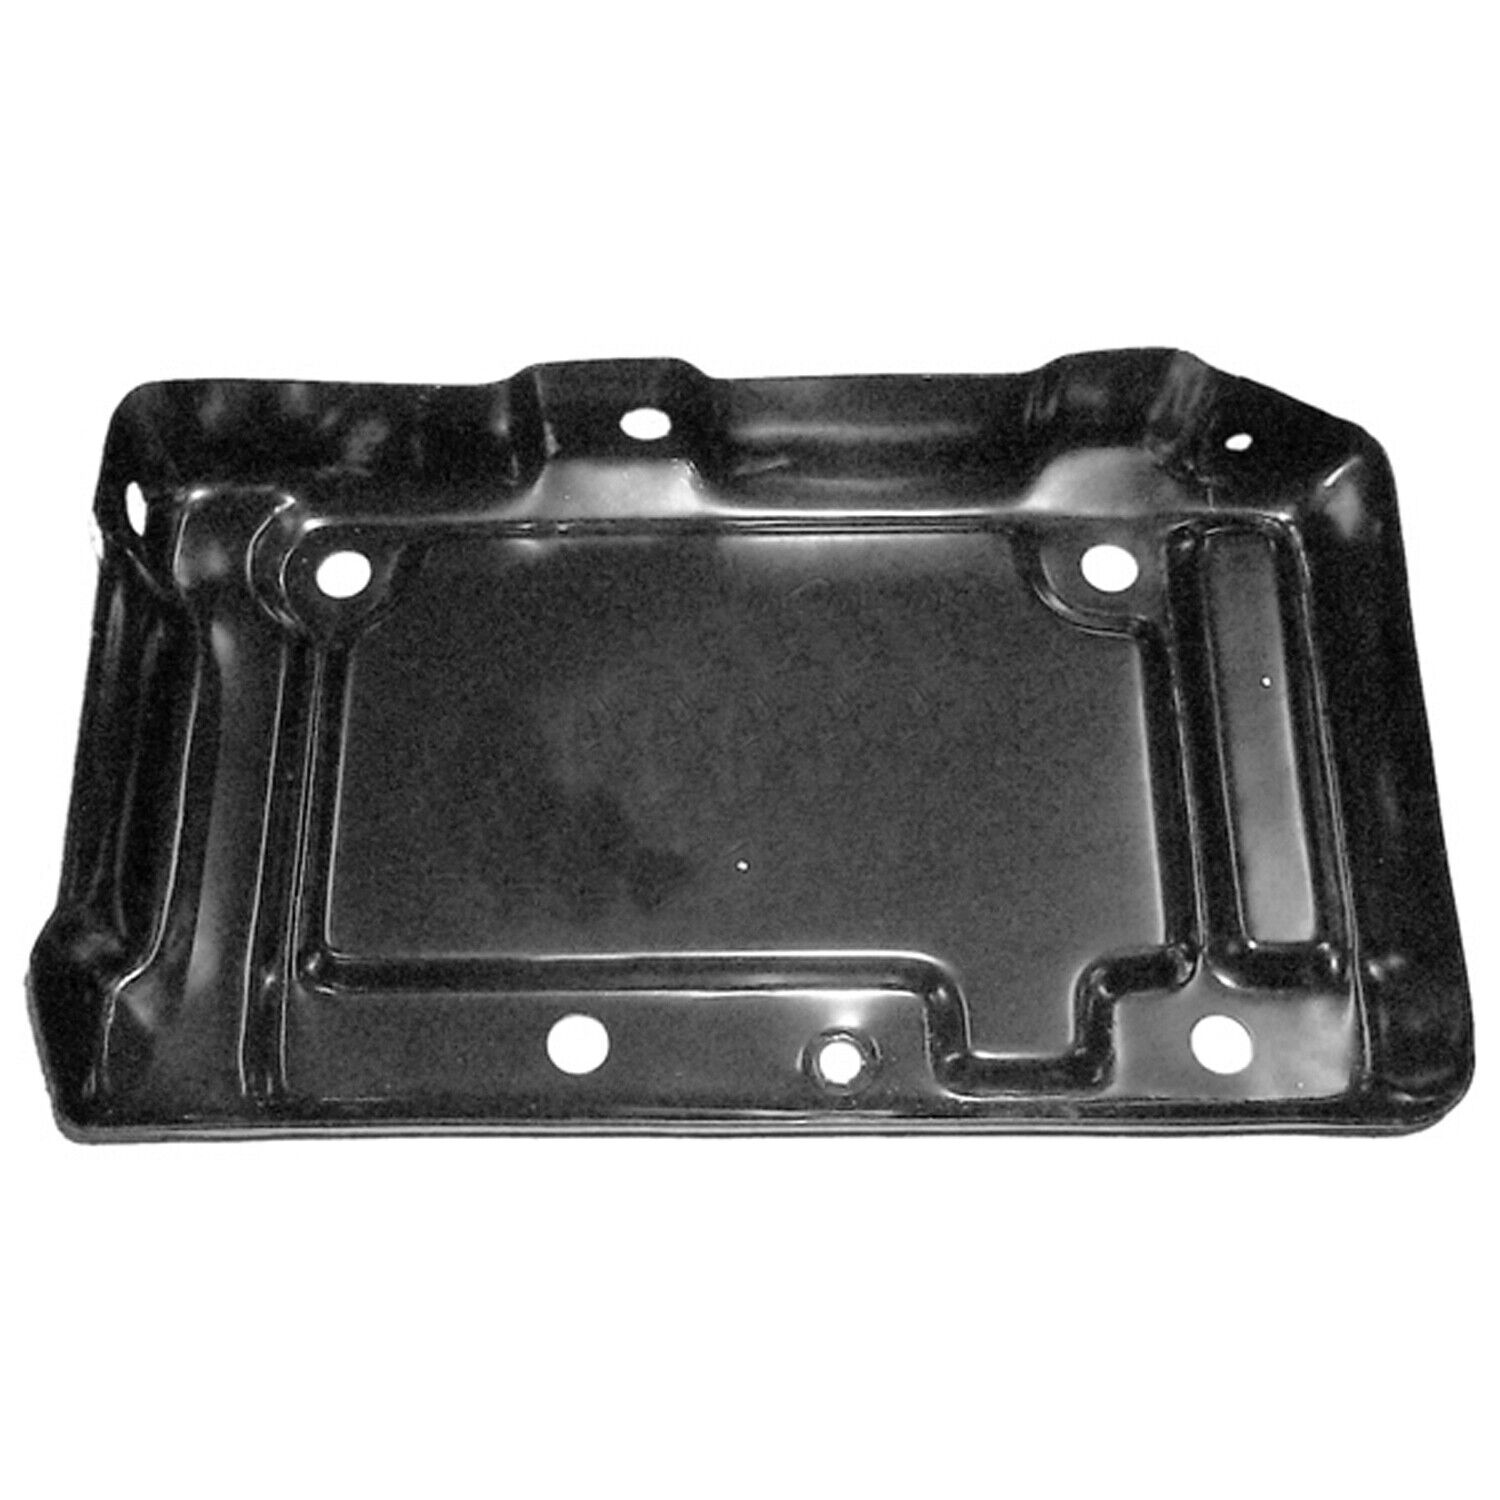 Battery Tray fits 1966-1969 Plymouth Belvedere 2131-300-66